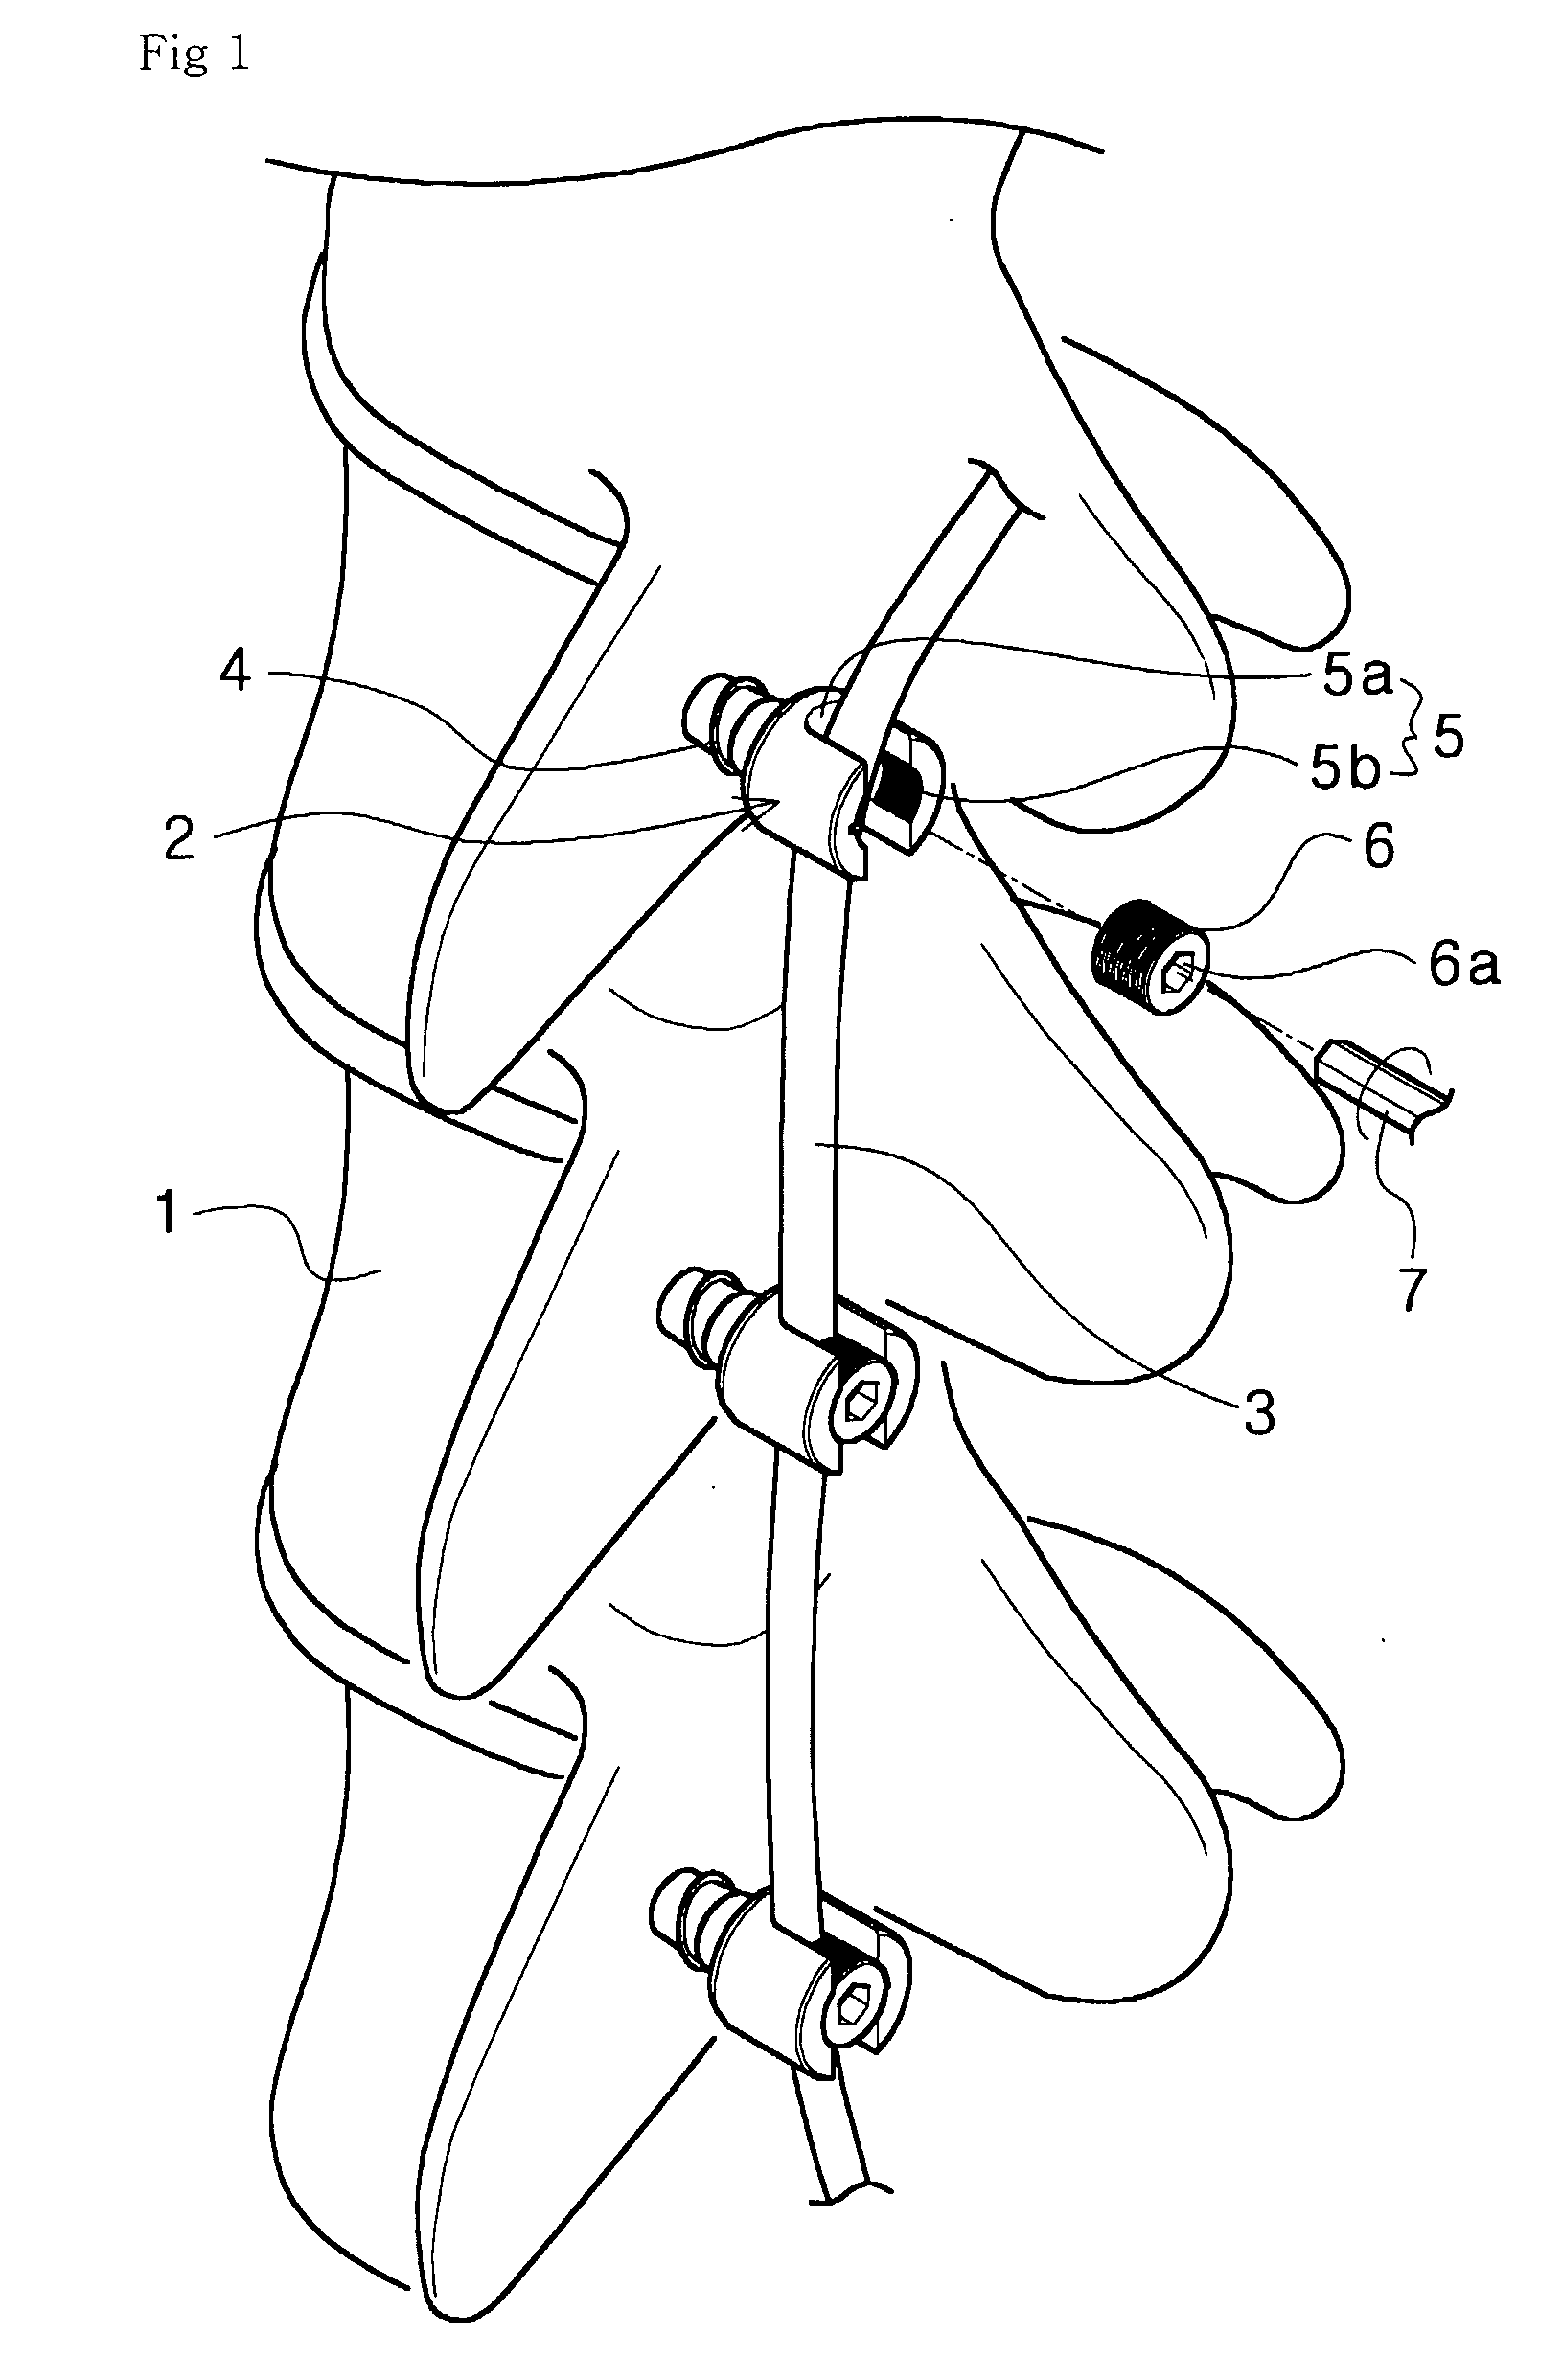 Pedicle Screw and Device for Injecting Bone Cement into Bone